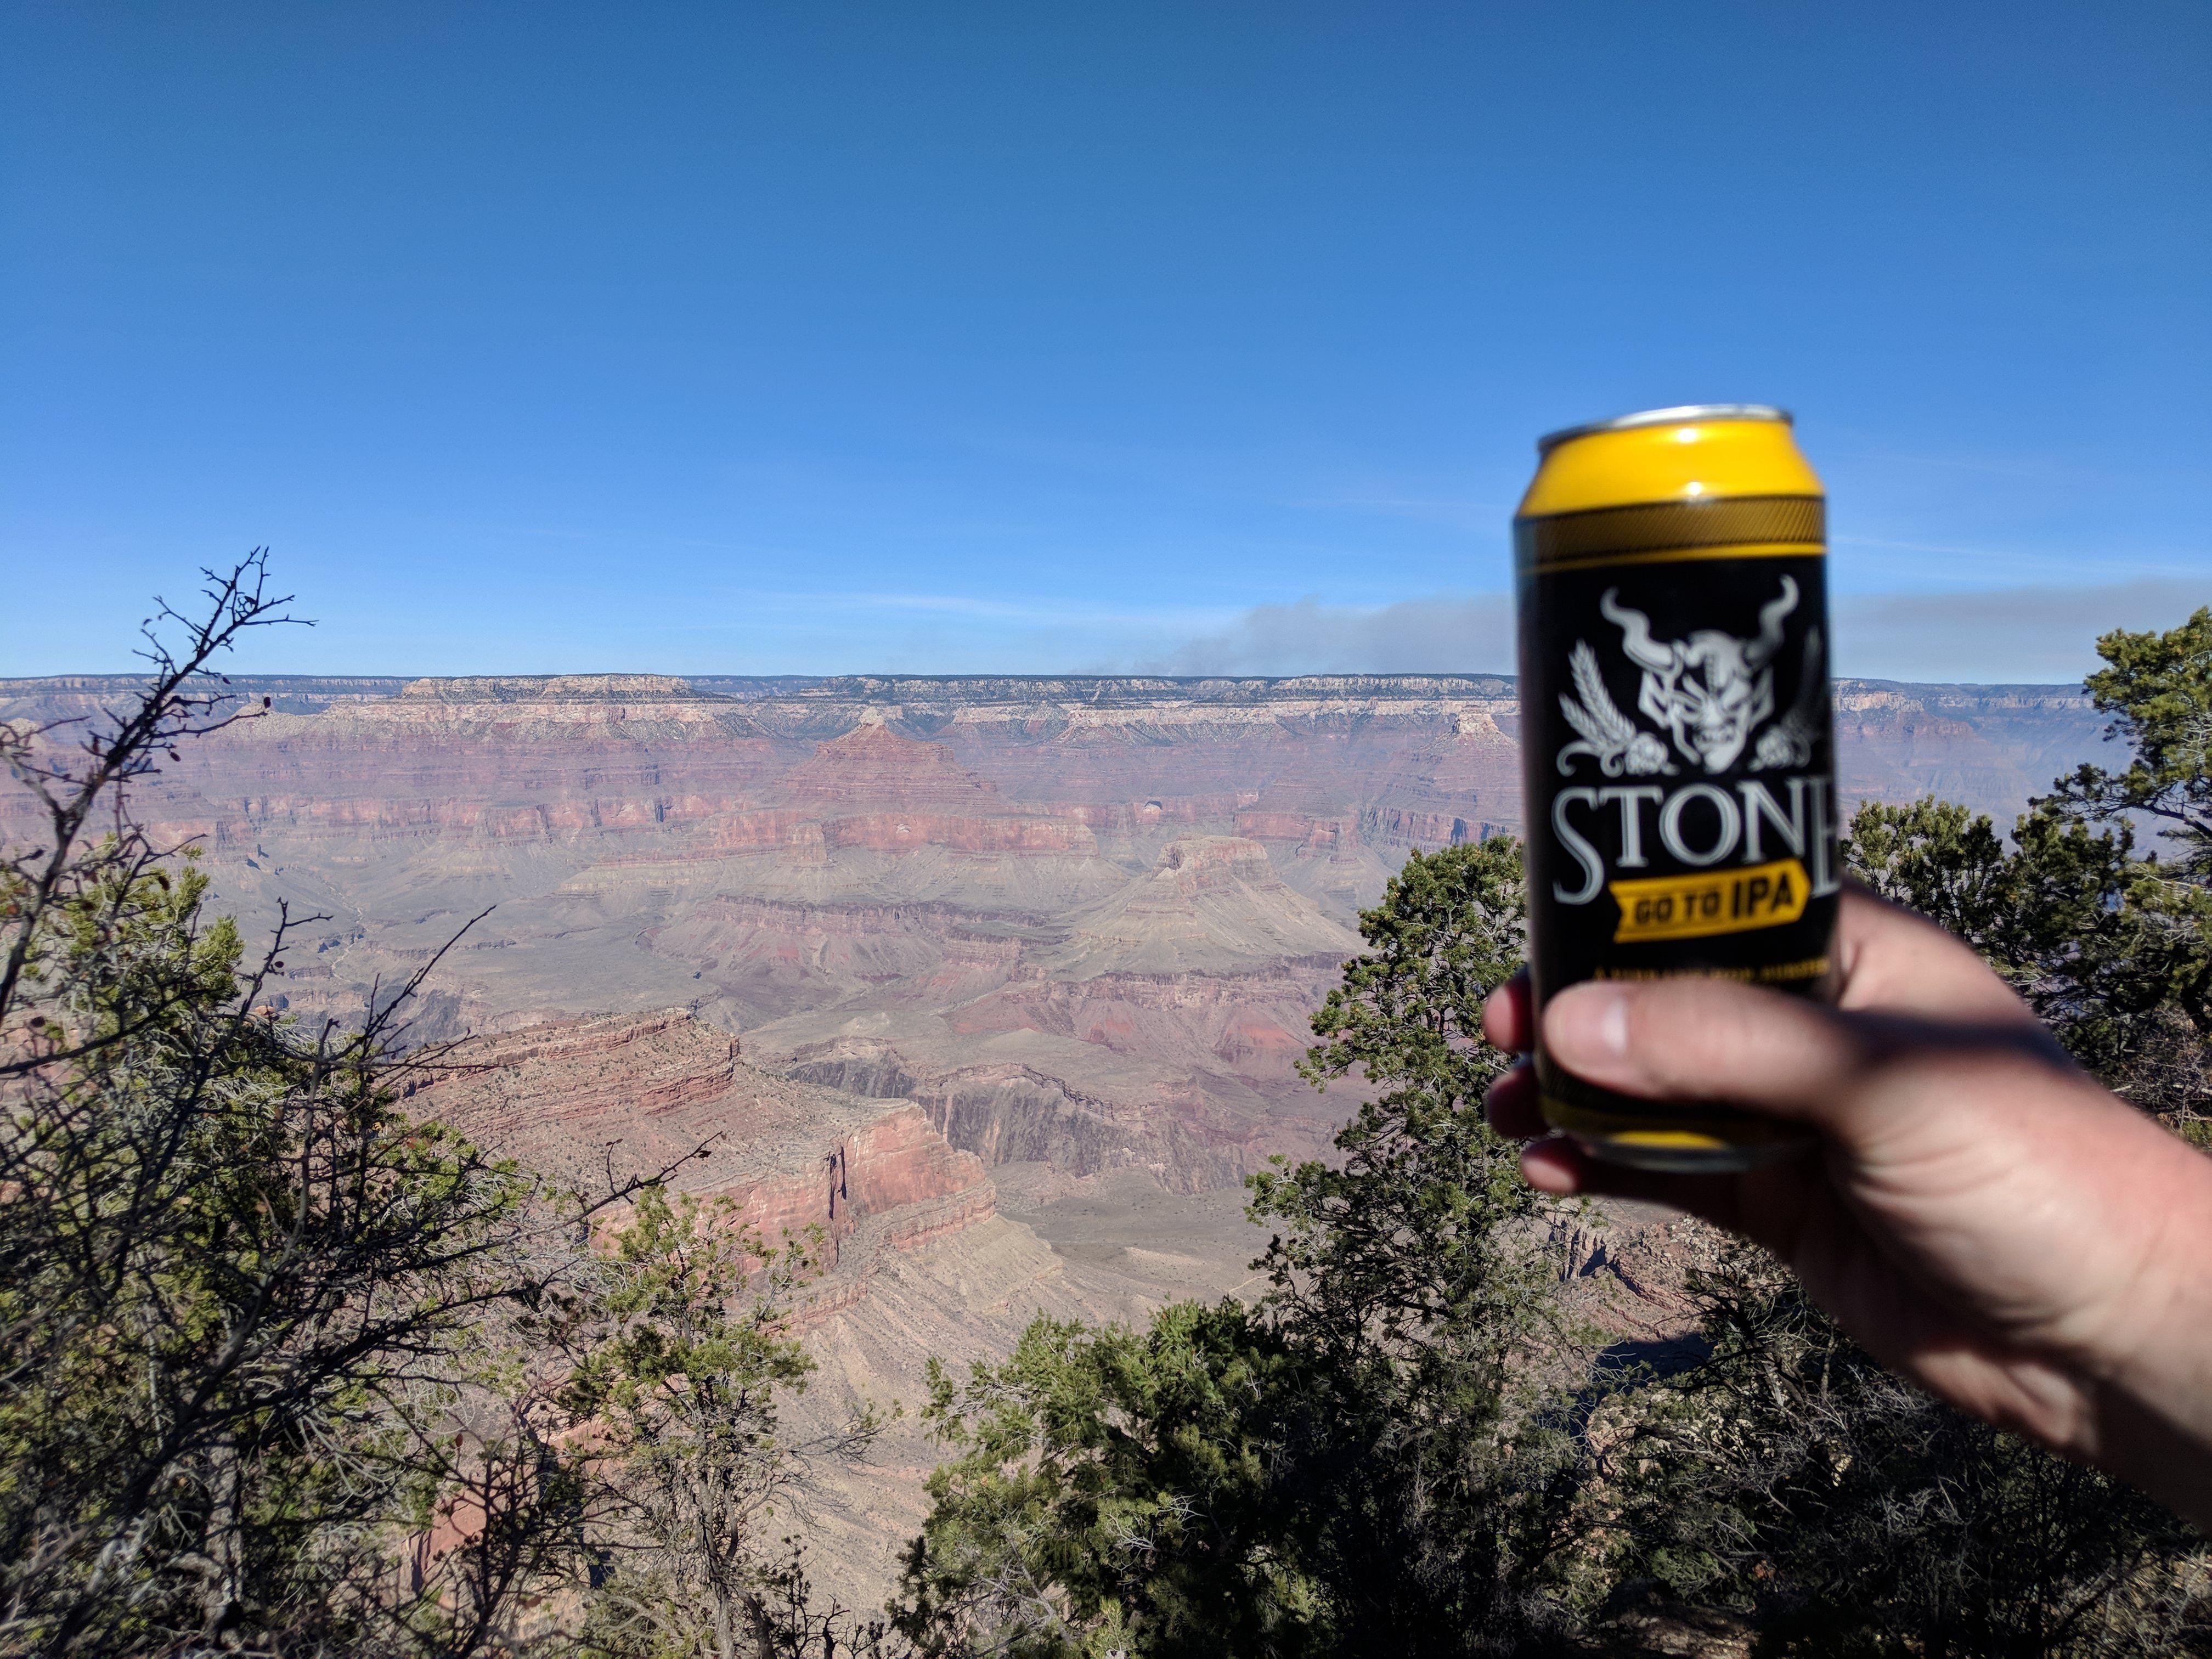 Grand Canyon IPA Logo - Beer With a View: Stone 'Go To IPA' at the South Rim of the Grand ...